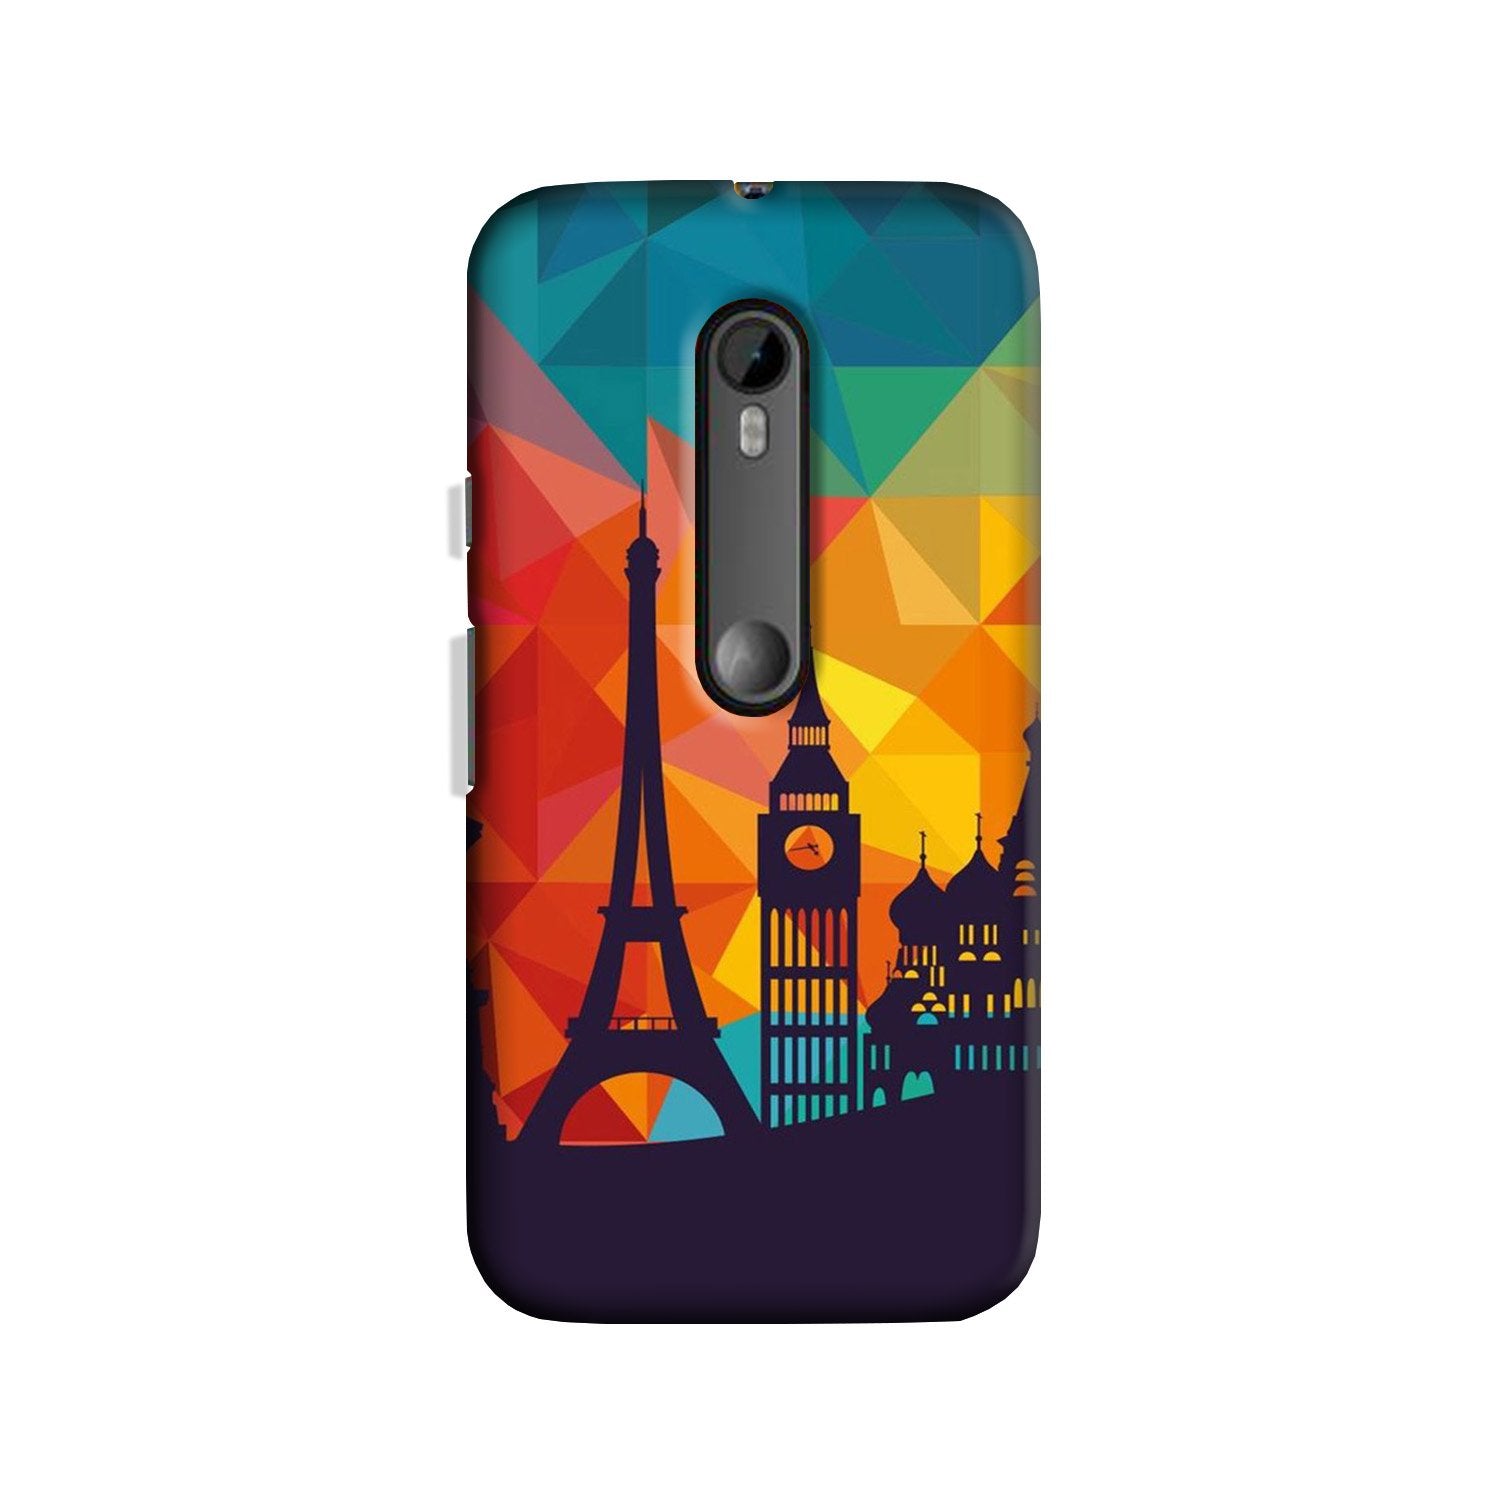 Eiffel Tower2 Case for Moto X Play